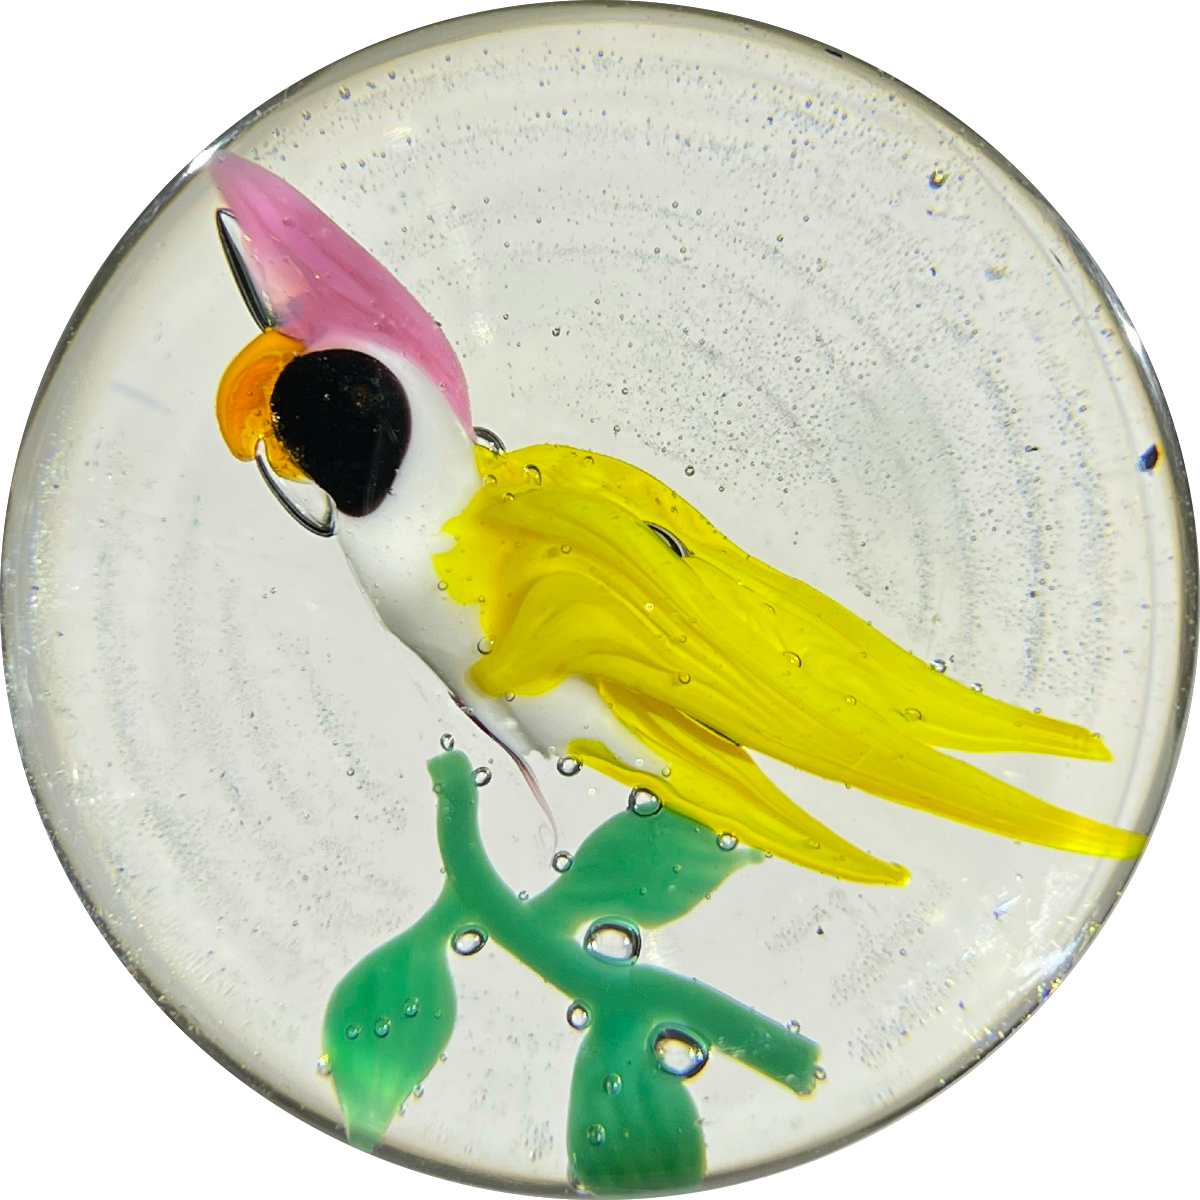 Signed Harold Hacker 1967 Flamework Pink Crested Yellow Cockatiel Parrot on Clear